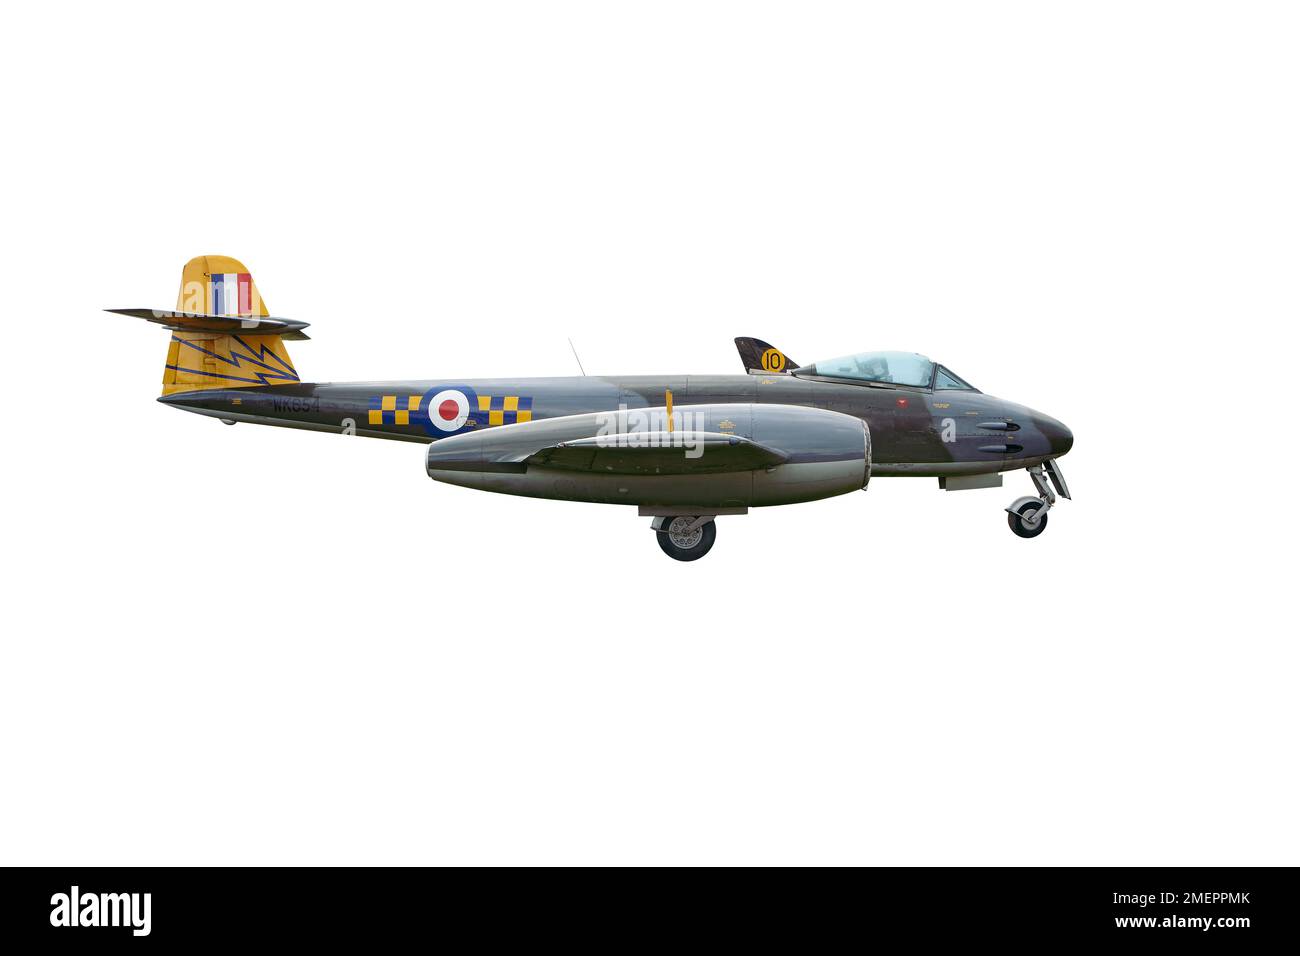 Gloster Meteor F Mk.8 British jet fighter, side view Stock Photo